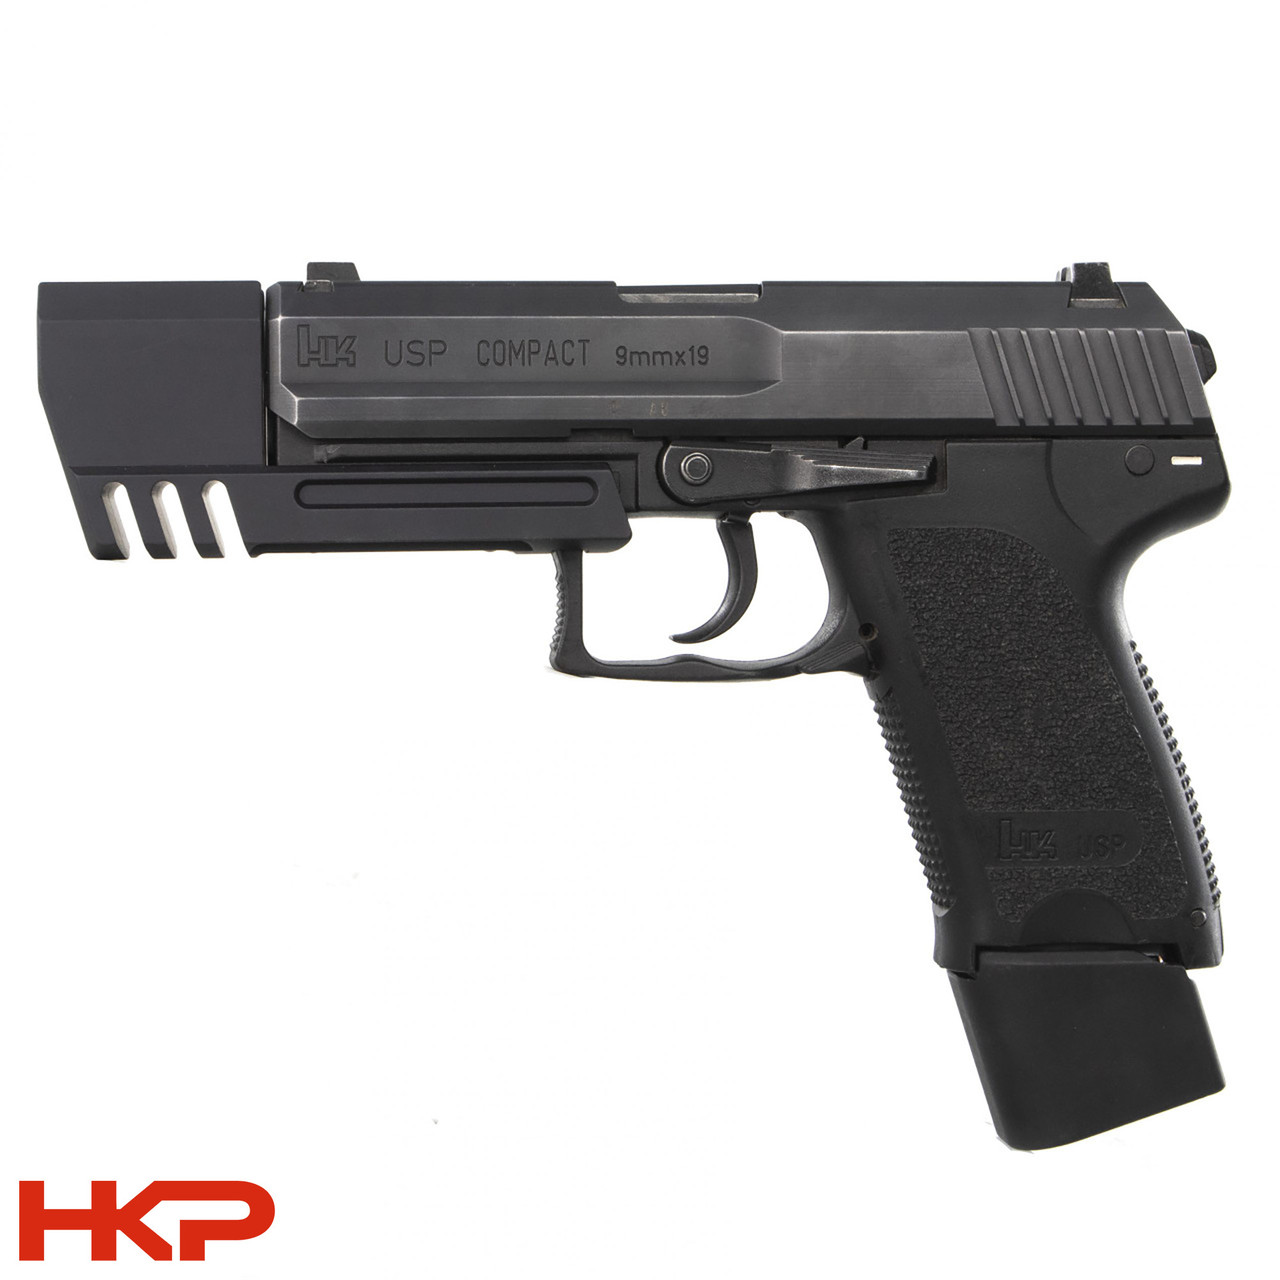 Match Weight - Compensator with Light Rail - Fits HK USP Compact 9 / 40